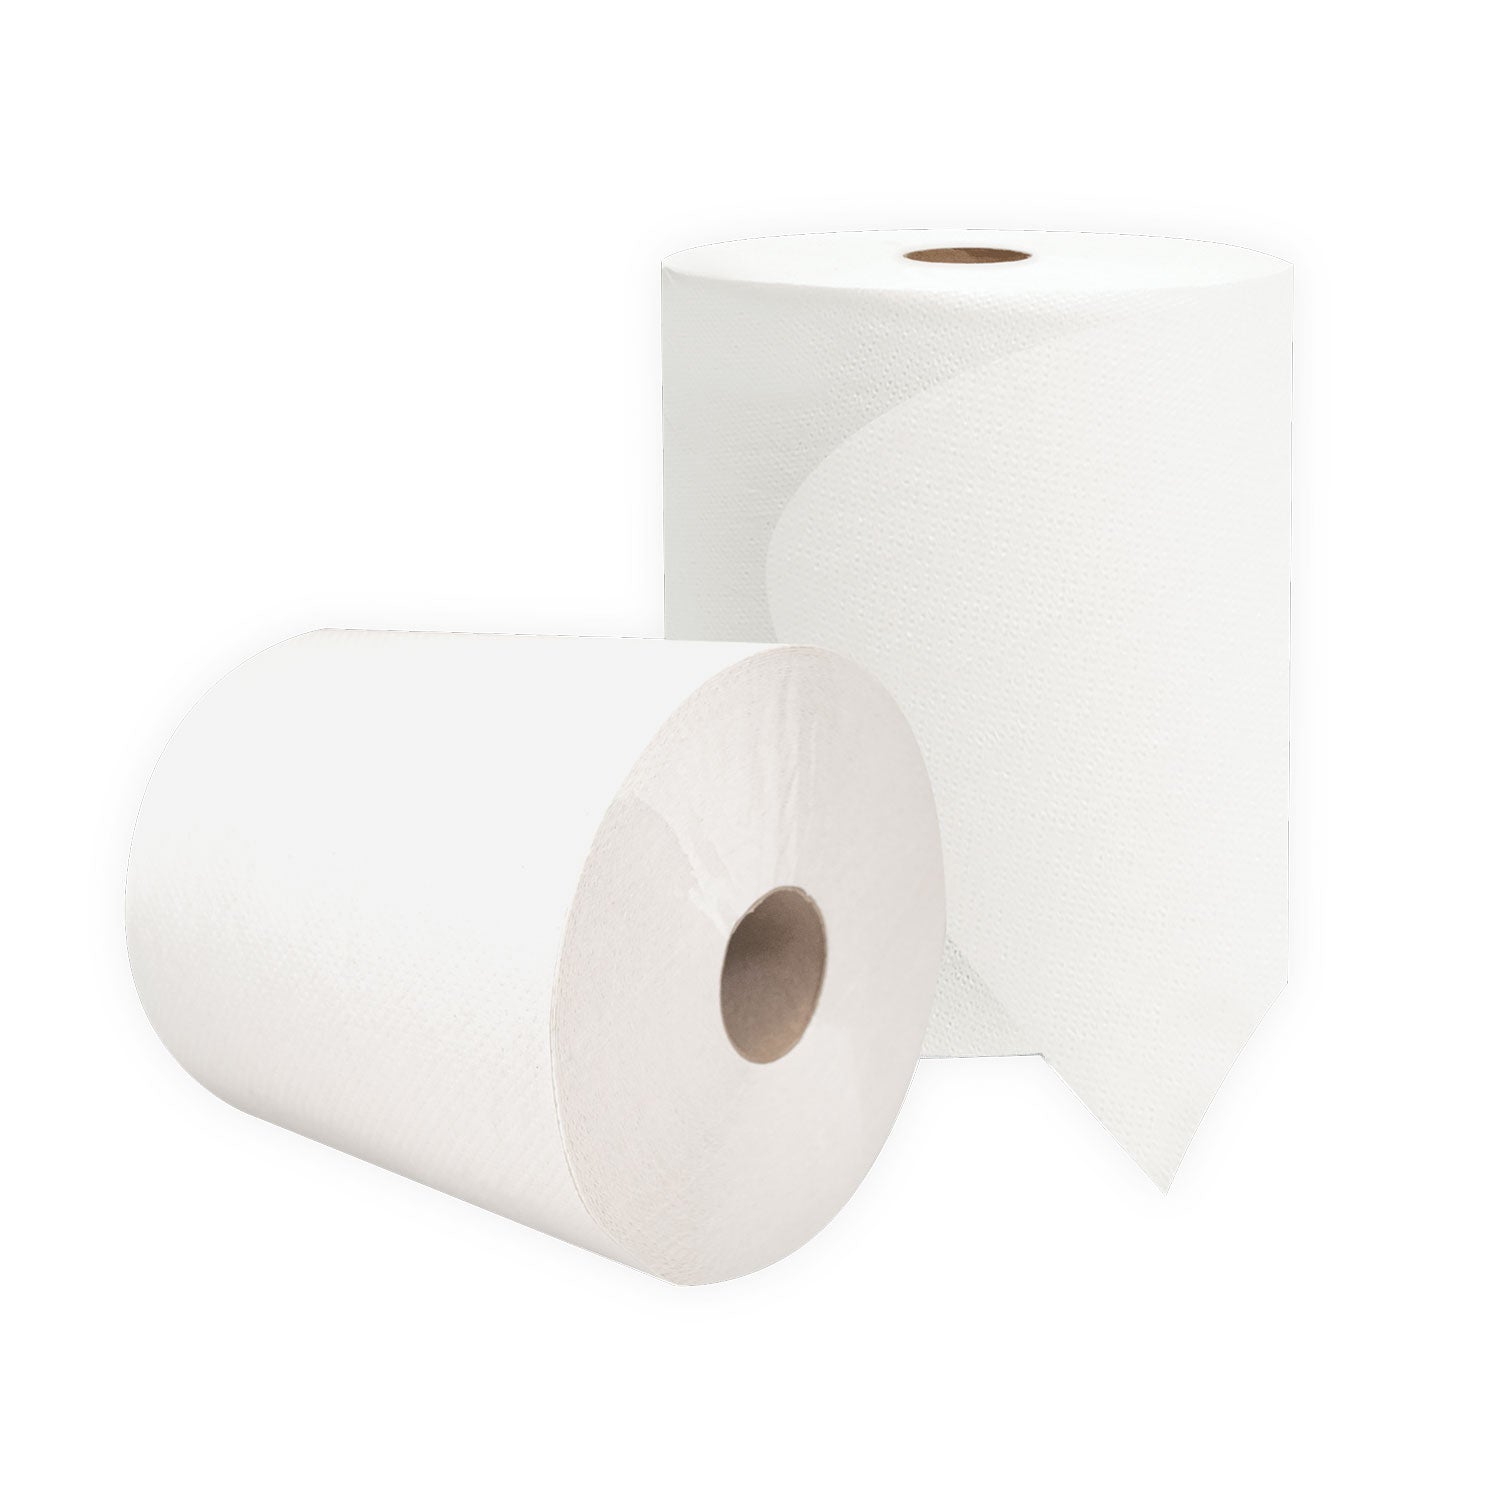 valay-universal-tad-roll-towels-1-ply-8-x-600-ft-white-6-rolls-carton_morvt9158 - 4